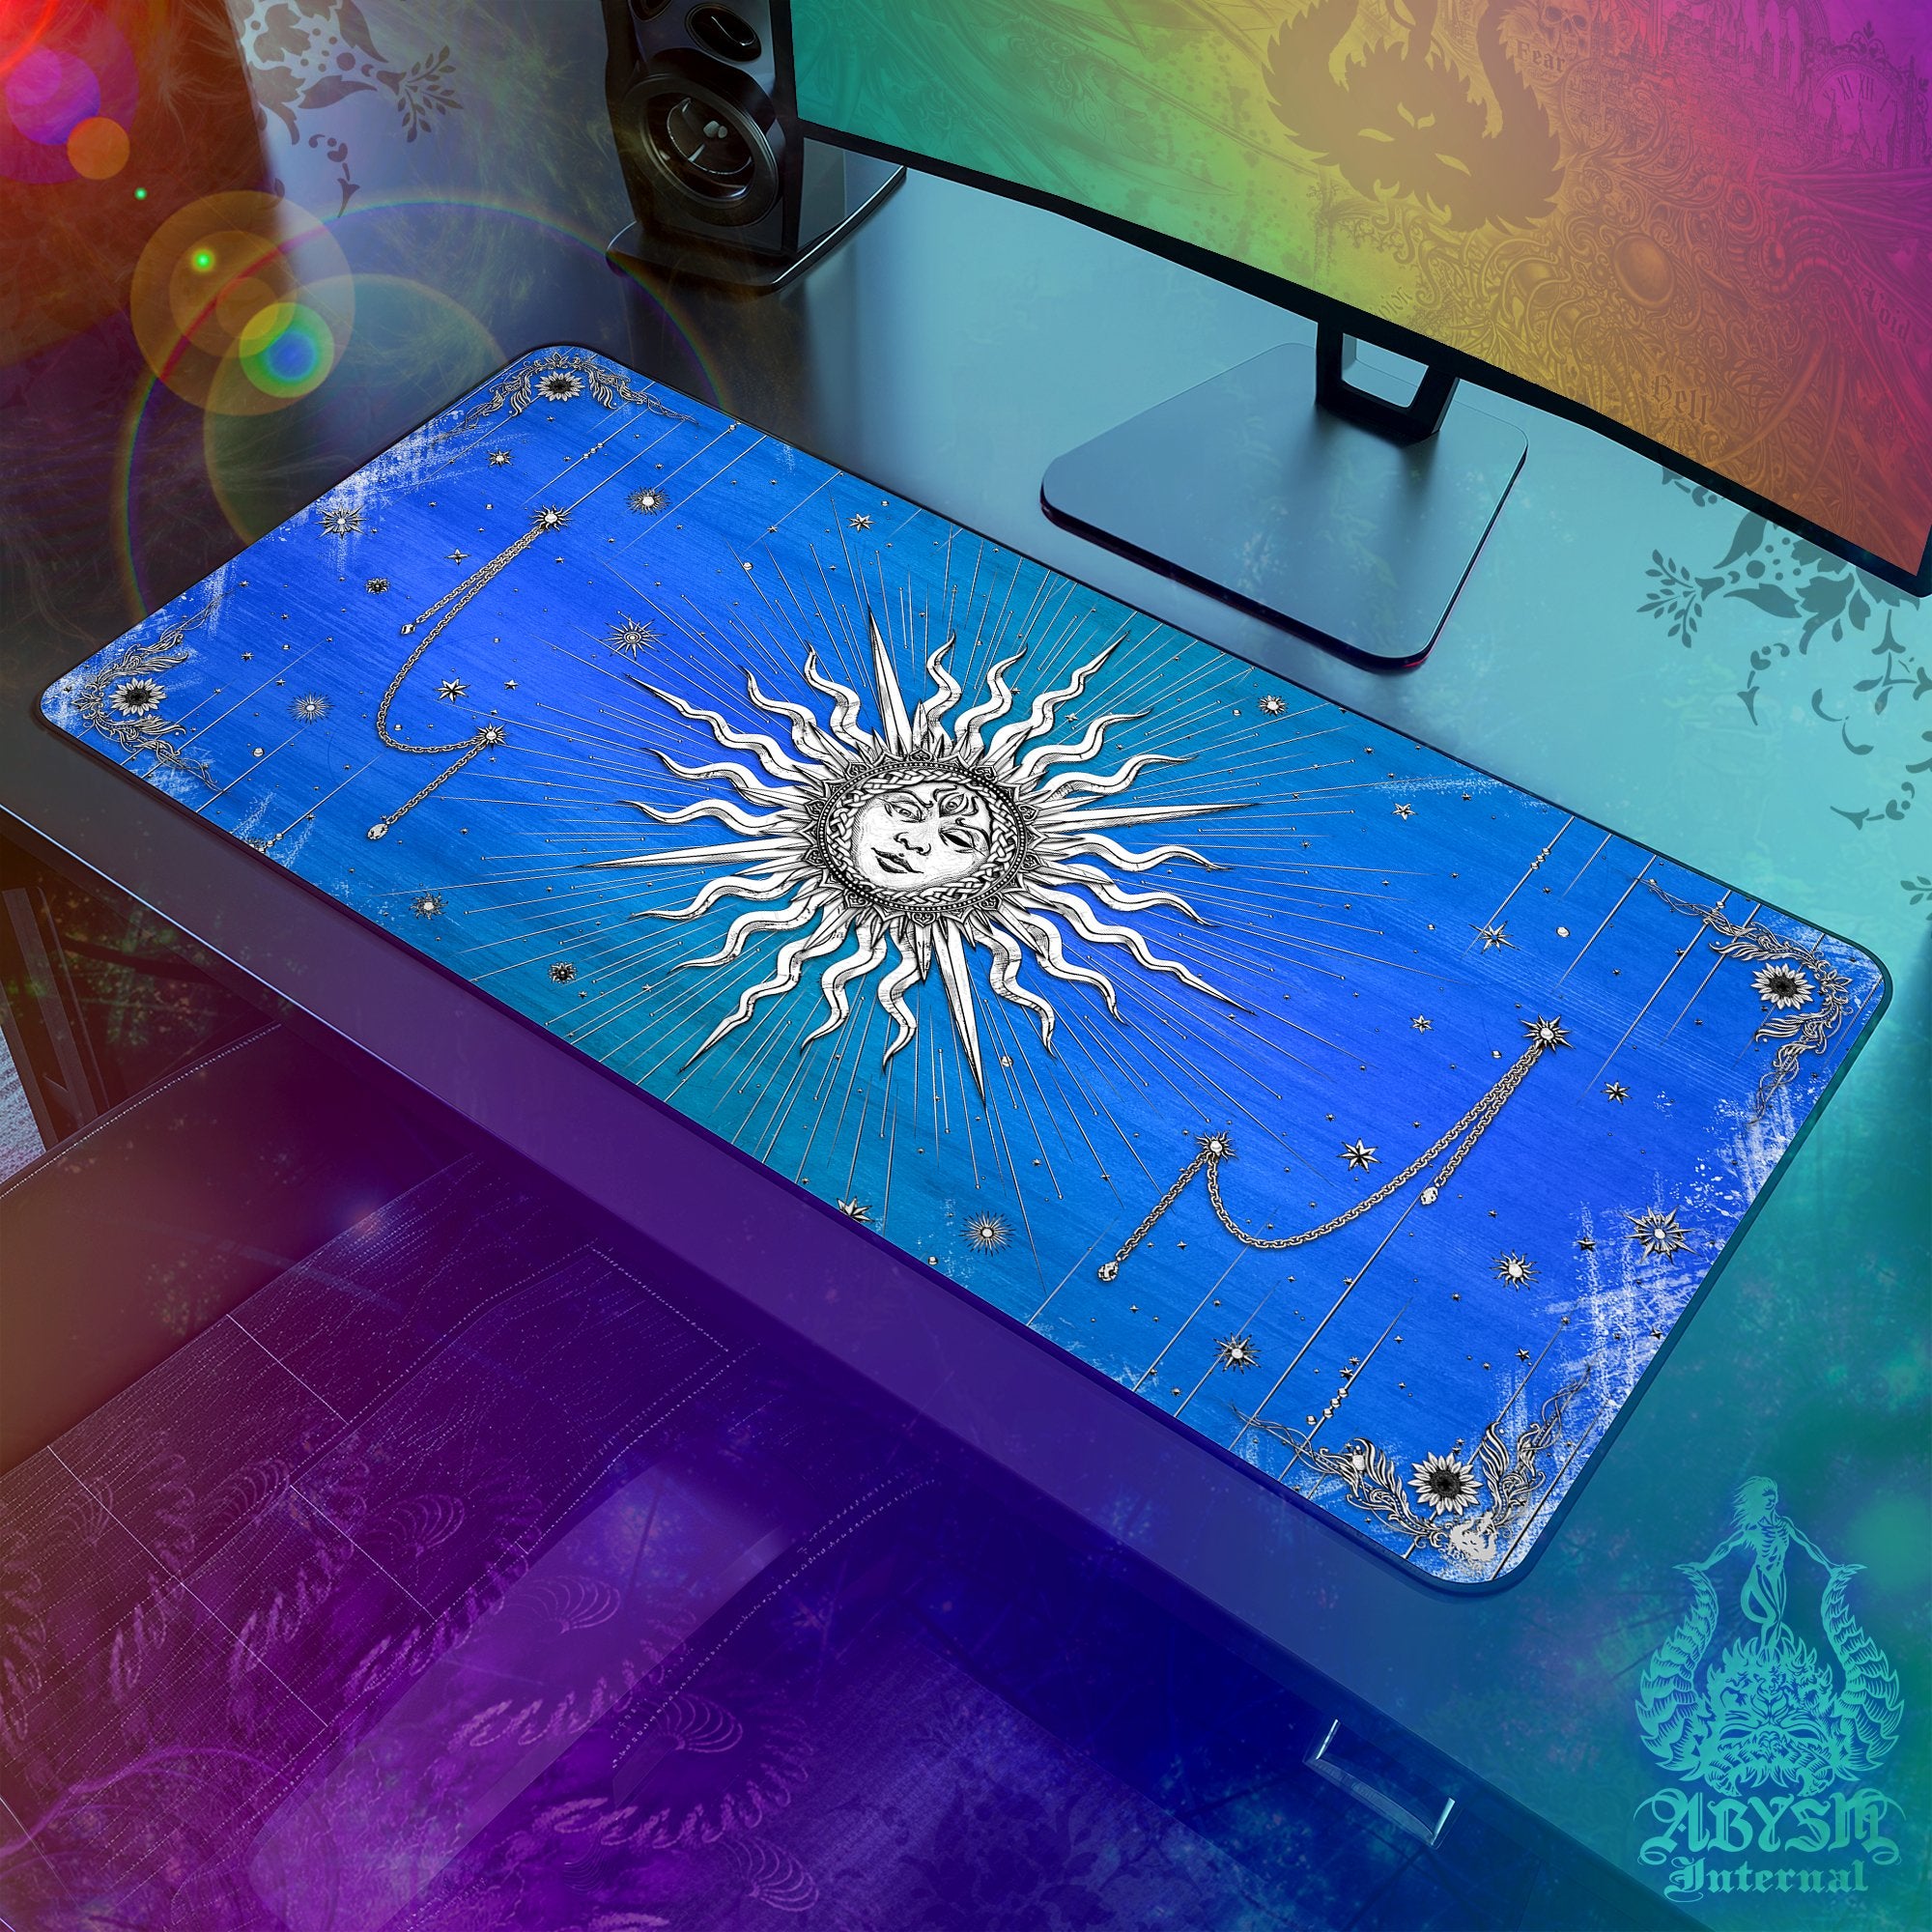 Tarot Arcana Workpad, White Sun Desk Mat, Boho Gaming Mouse Pad, Indie Table Protector Cover, Esoteric Art Print - 6 Colors - Abysm Internal